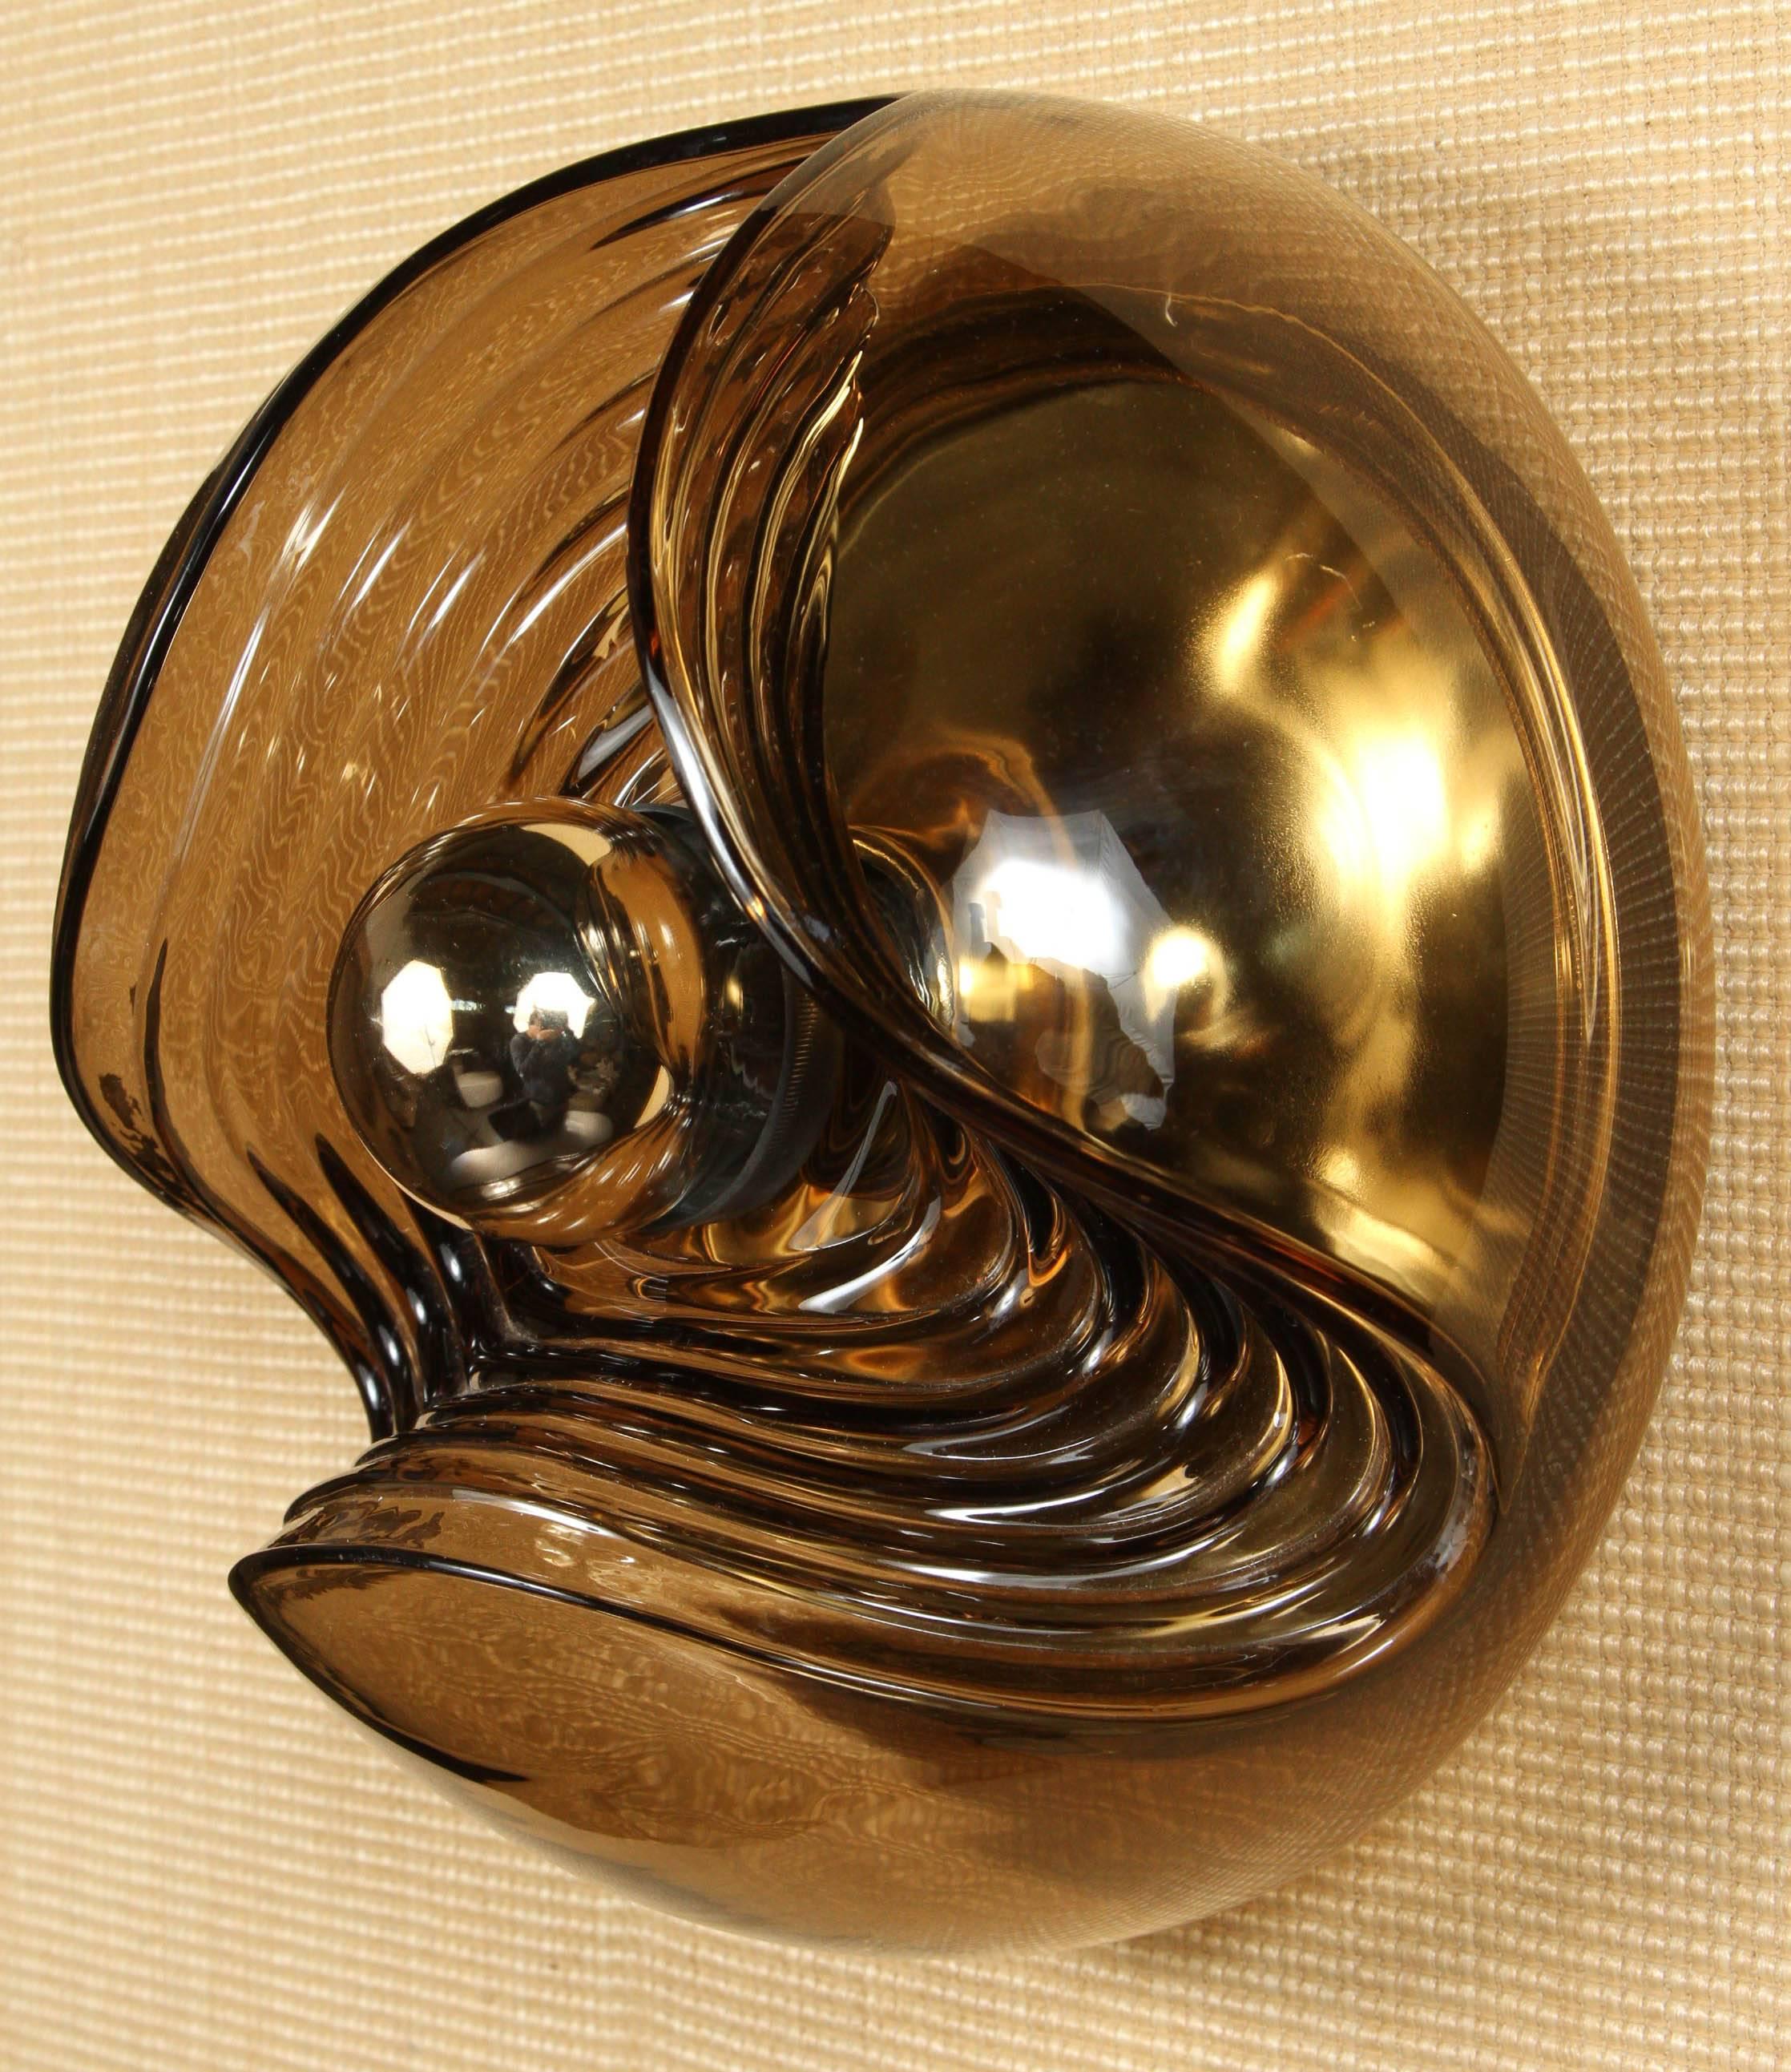 Wonderful 1970s German Space Age smoked glass and brass flush ceiling mount or wall sconce fixture by Peill and Putzler.
The single light source has been newly rewired.